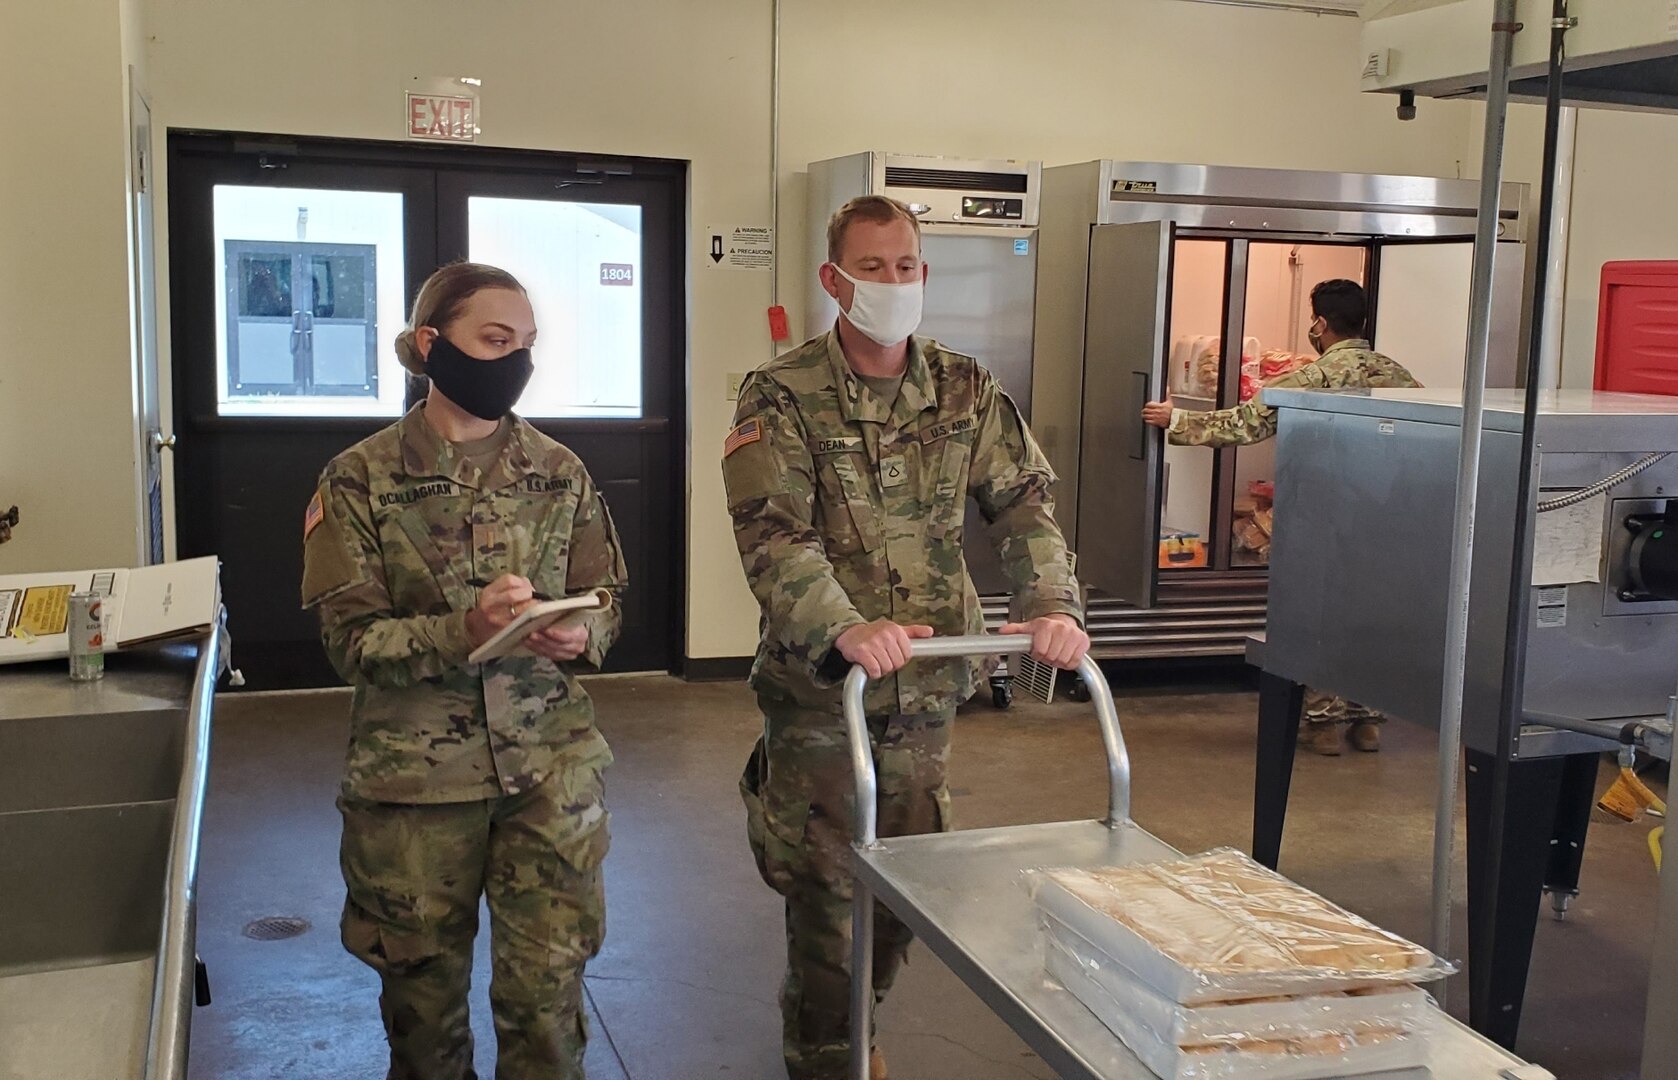 Second Lt. Colleen O’Callaghan, left, a platoon leader with the Ohio Army National Guard’s 1st Battalion, 148th Infantry Regiment, oversees her team June 9, 2020, at Second Harvest Food Bank of Clark, Champaign and Logan Counties in Springfield, Ohio. O’Callaghan, the Ohio National Guard’s first female Army infantry officer in its 232-year history, is one of many Guard members who volunteered to serve fellow Ohioans during the COVID-19 pandemic.